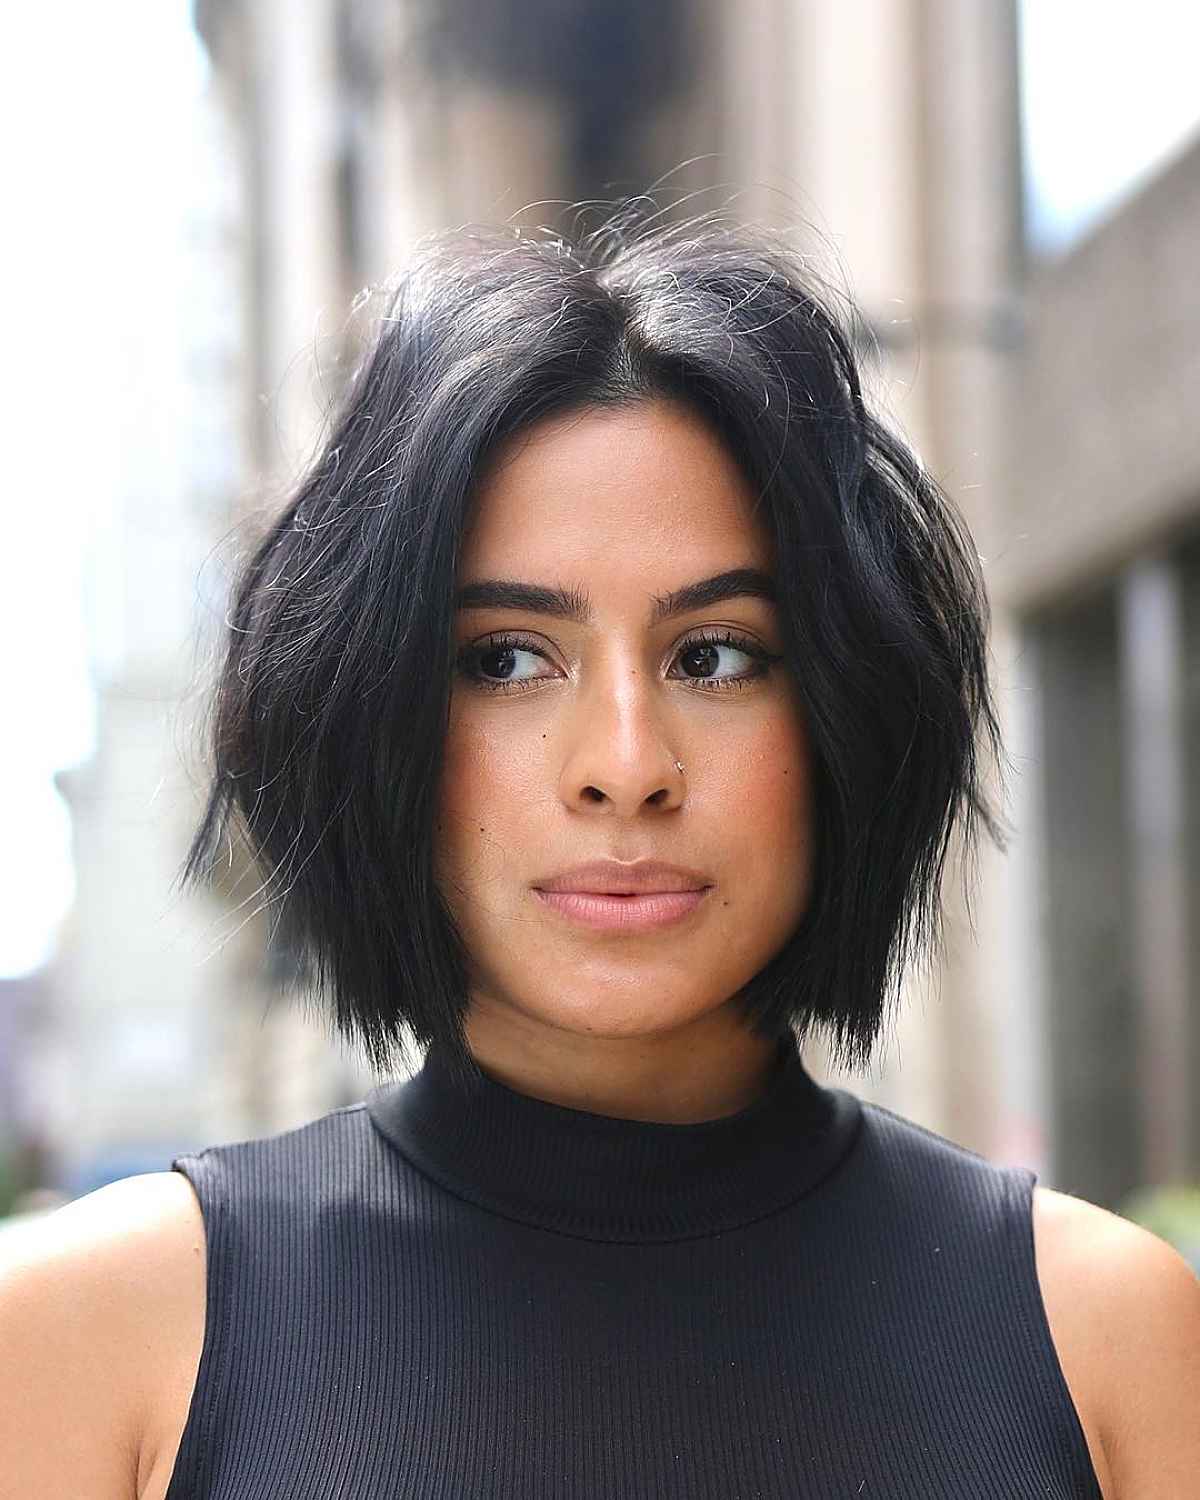 20 Chin Length Bob Hairstyles That Will Stun You in 20